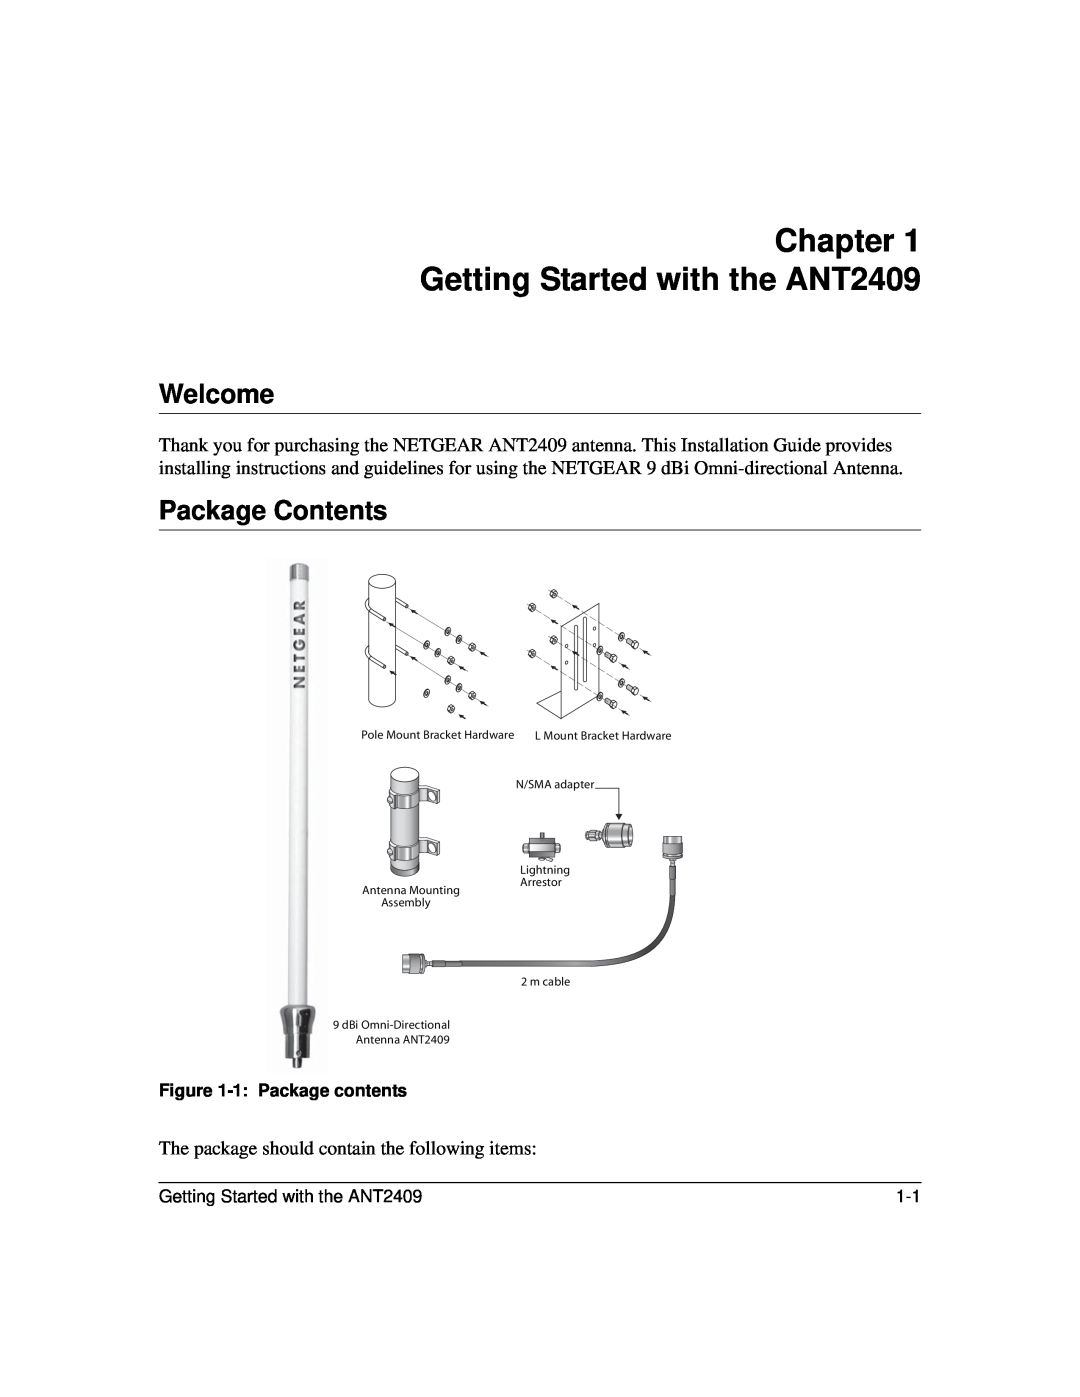 NETGEAR manual Chapter Getting Started with the ANT2409, Welcome, Package Contents 